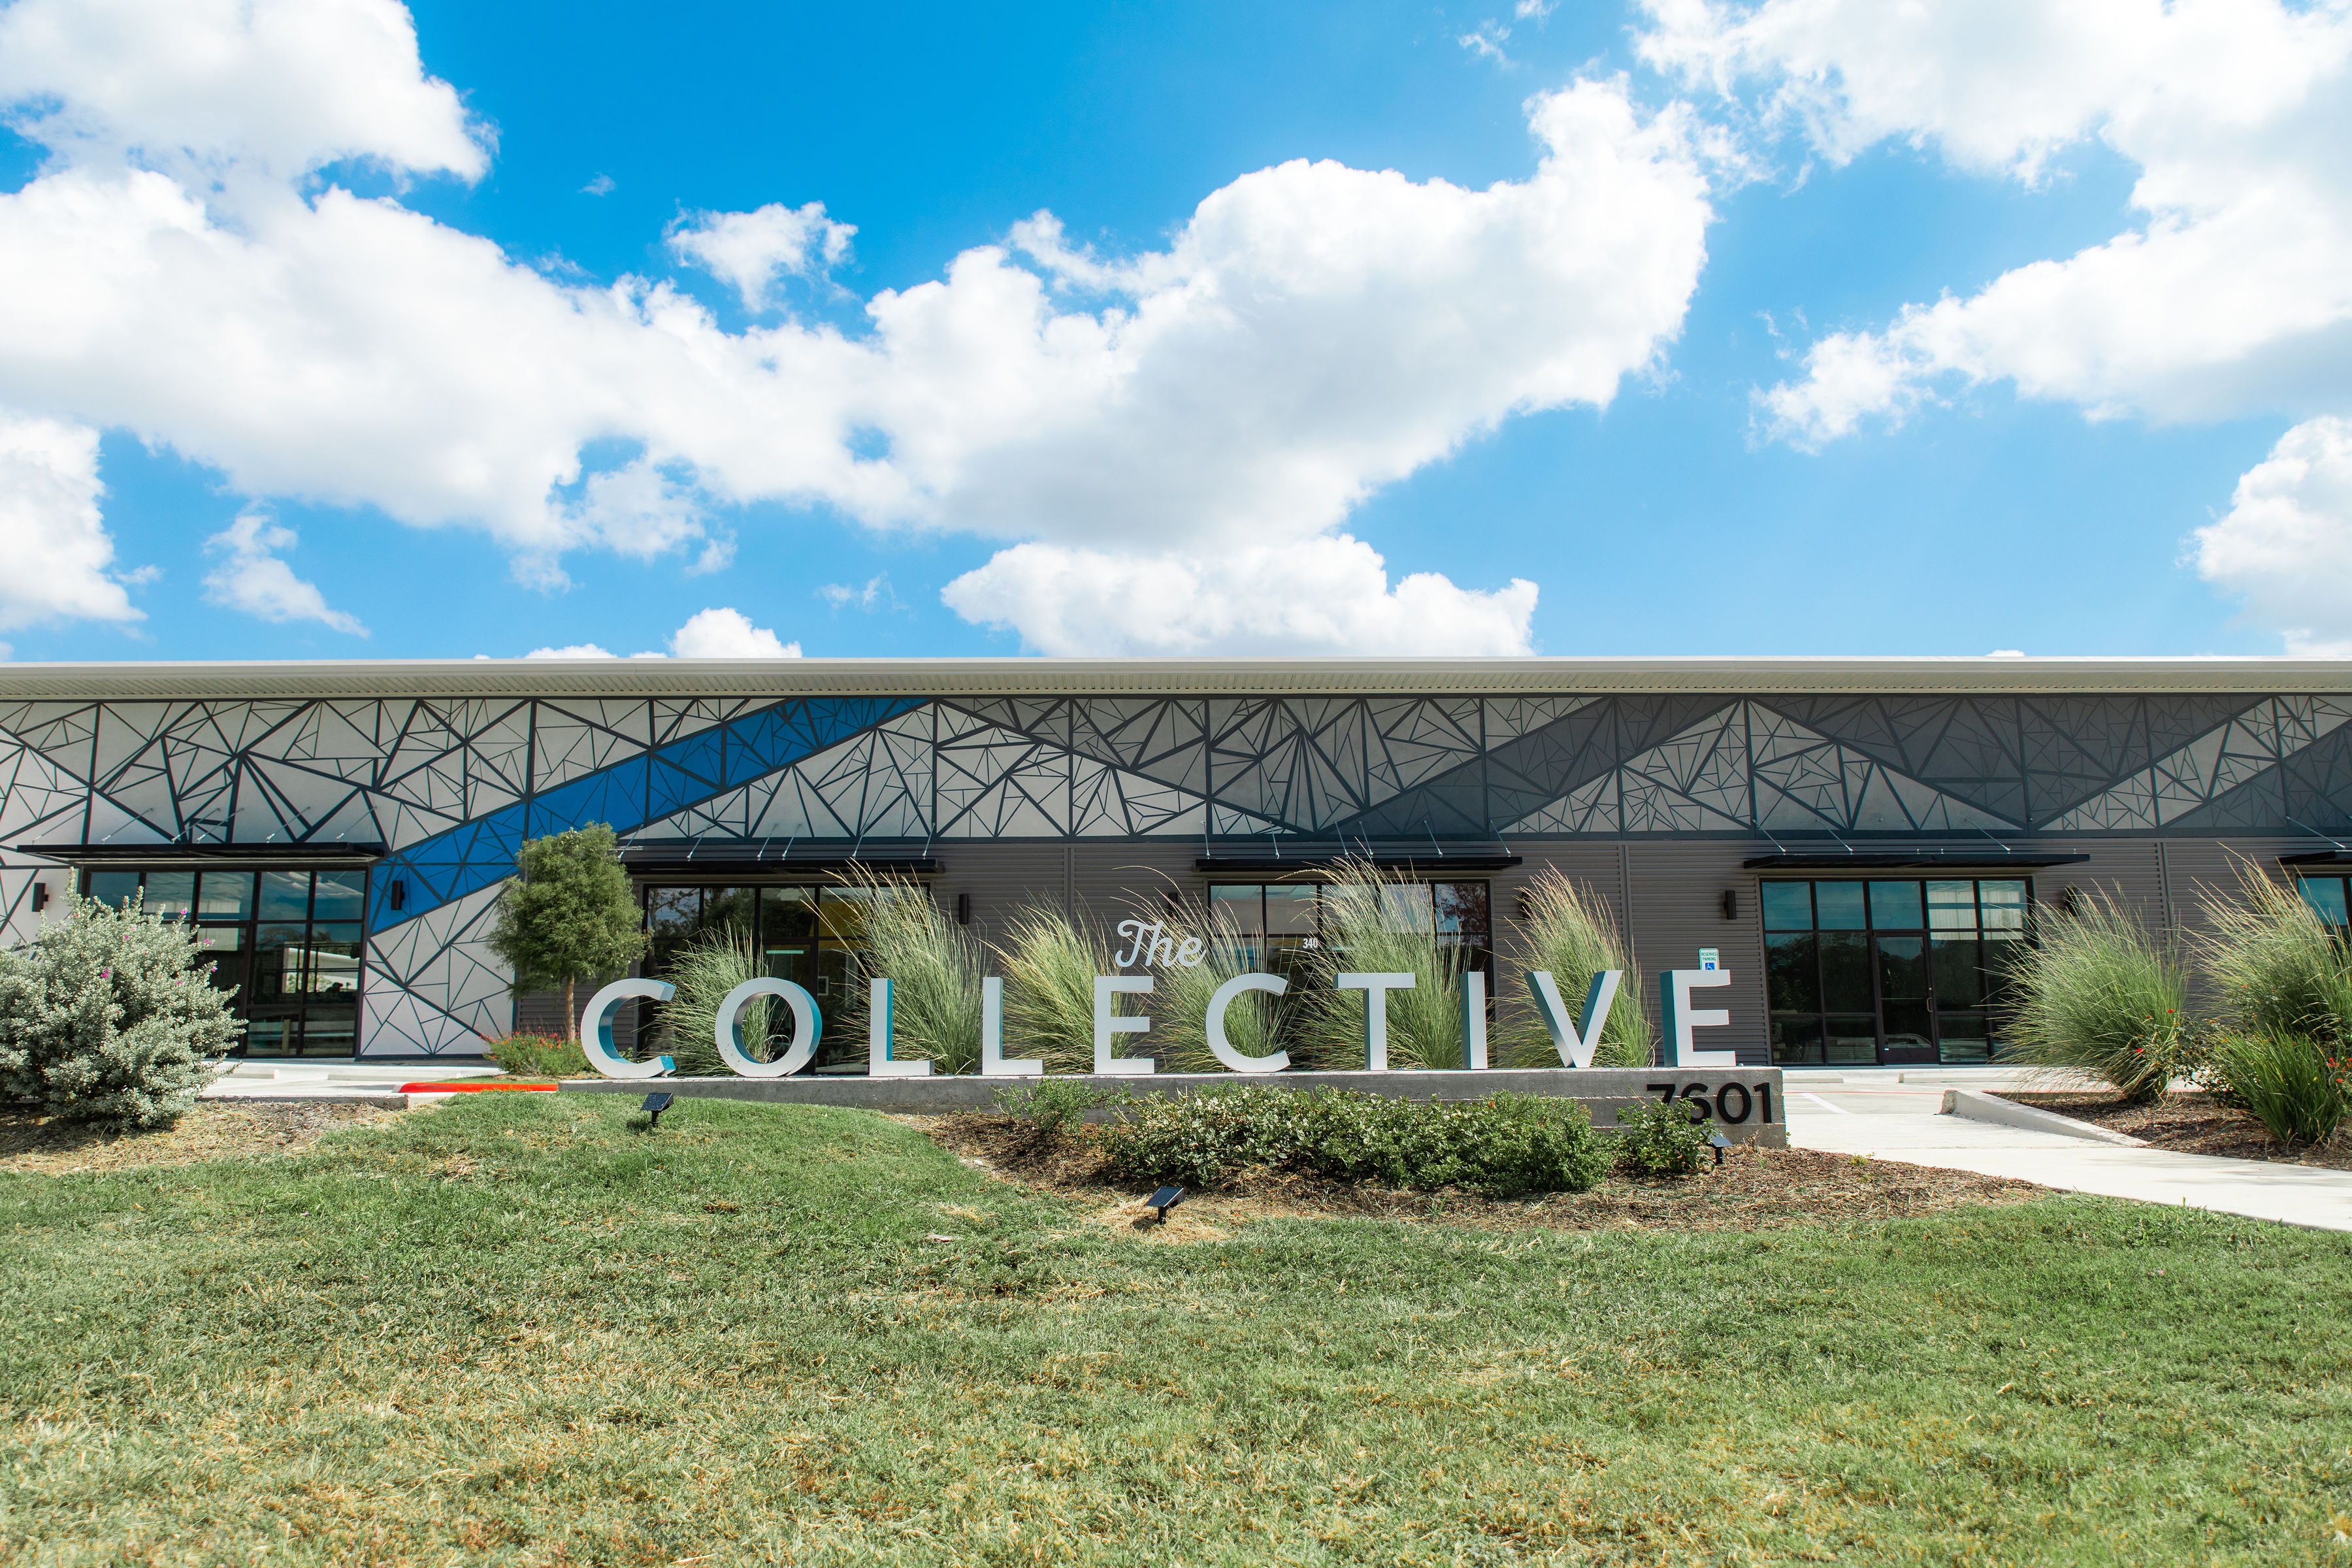 The Collective Mural Front 4 – Copy